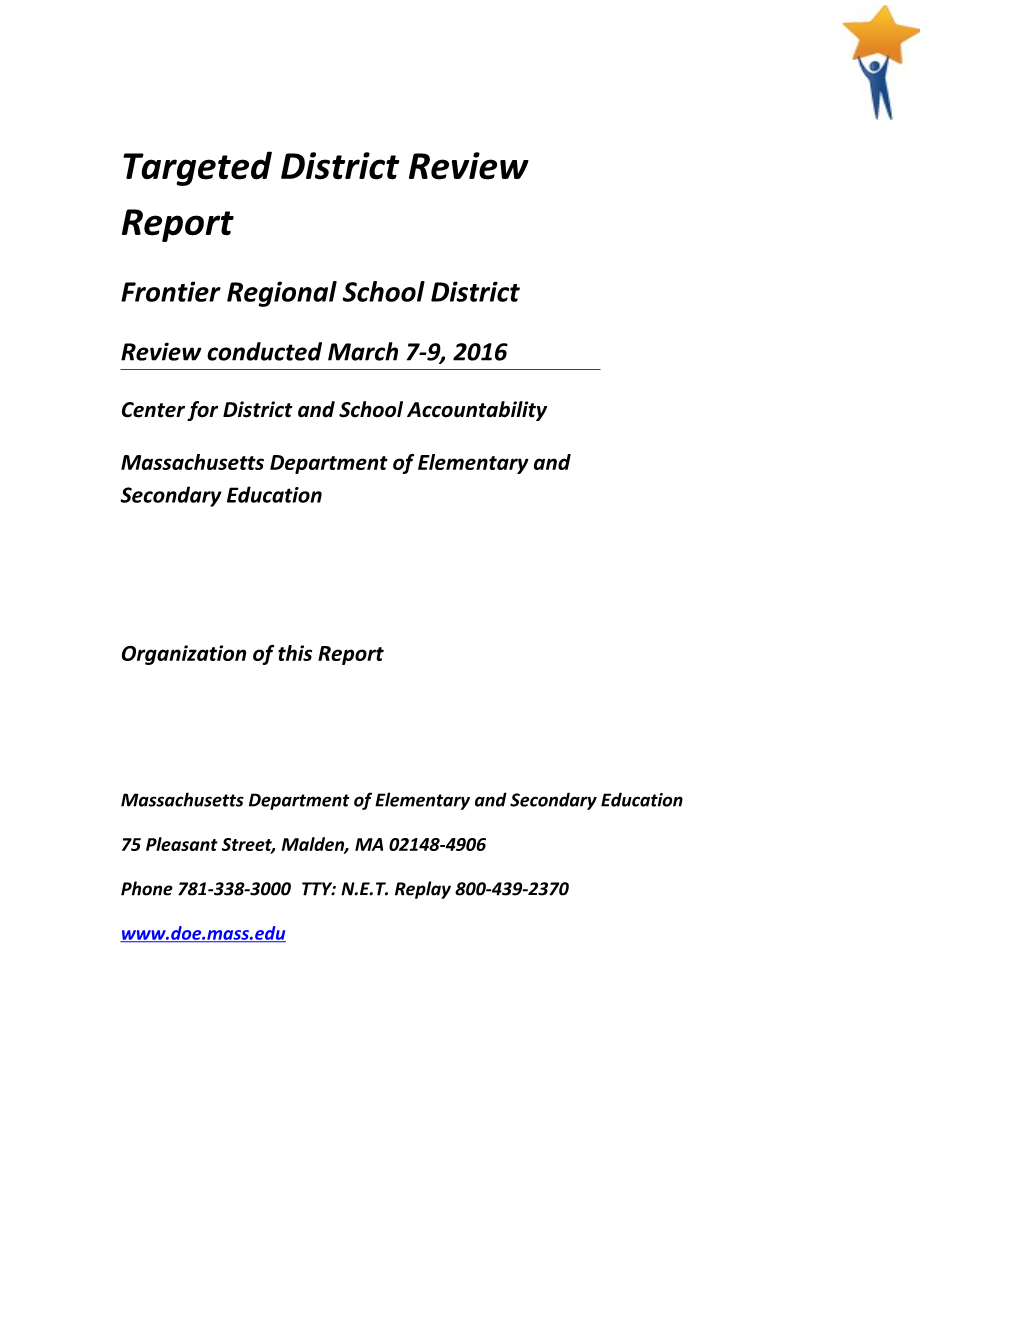 Frontier District Review Report, 2016 Onsite